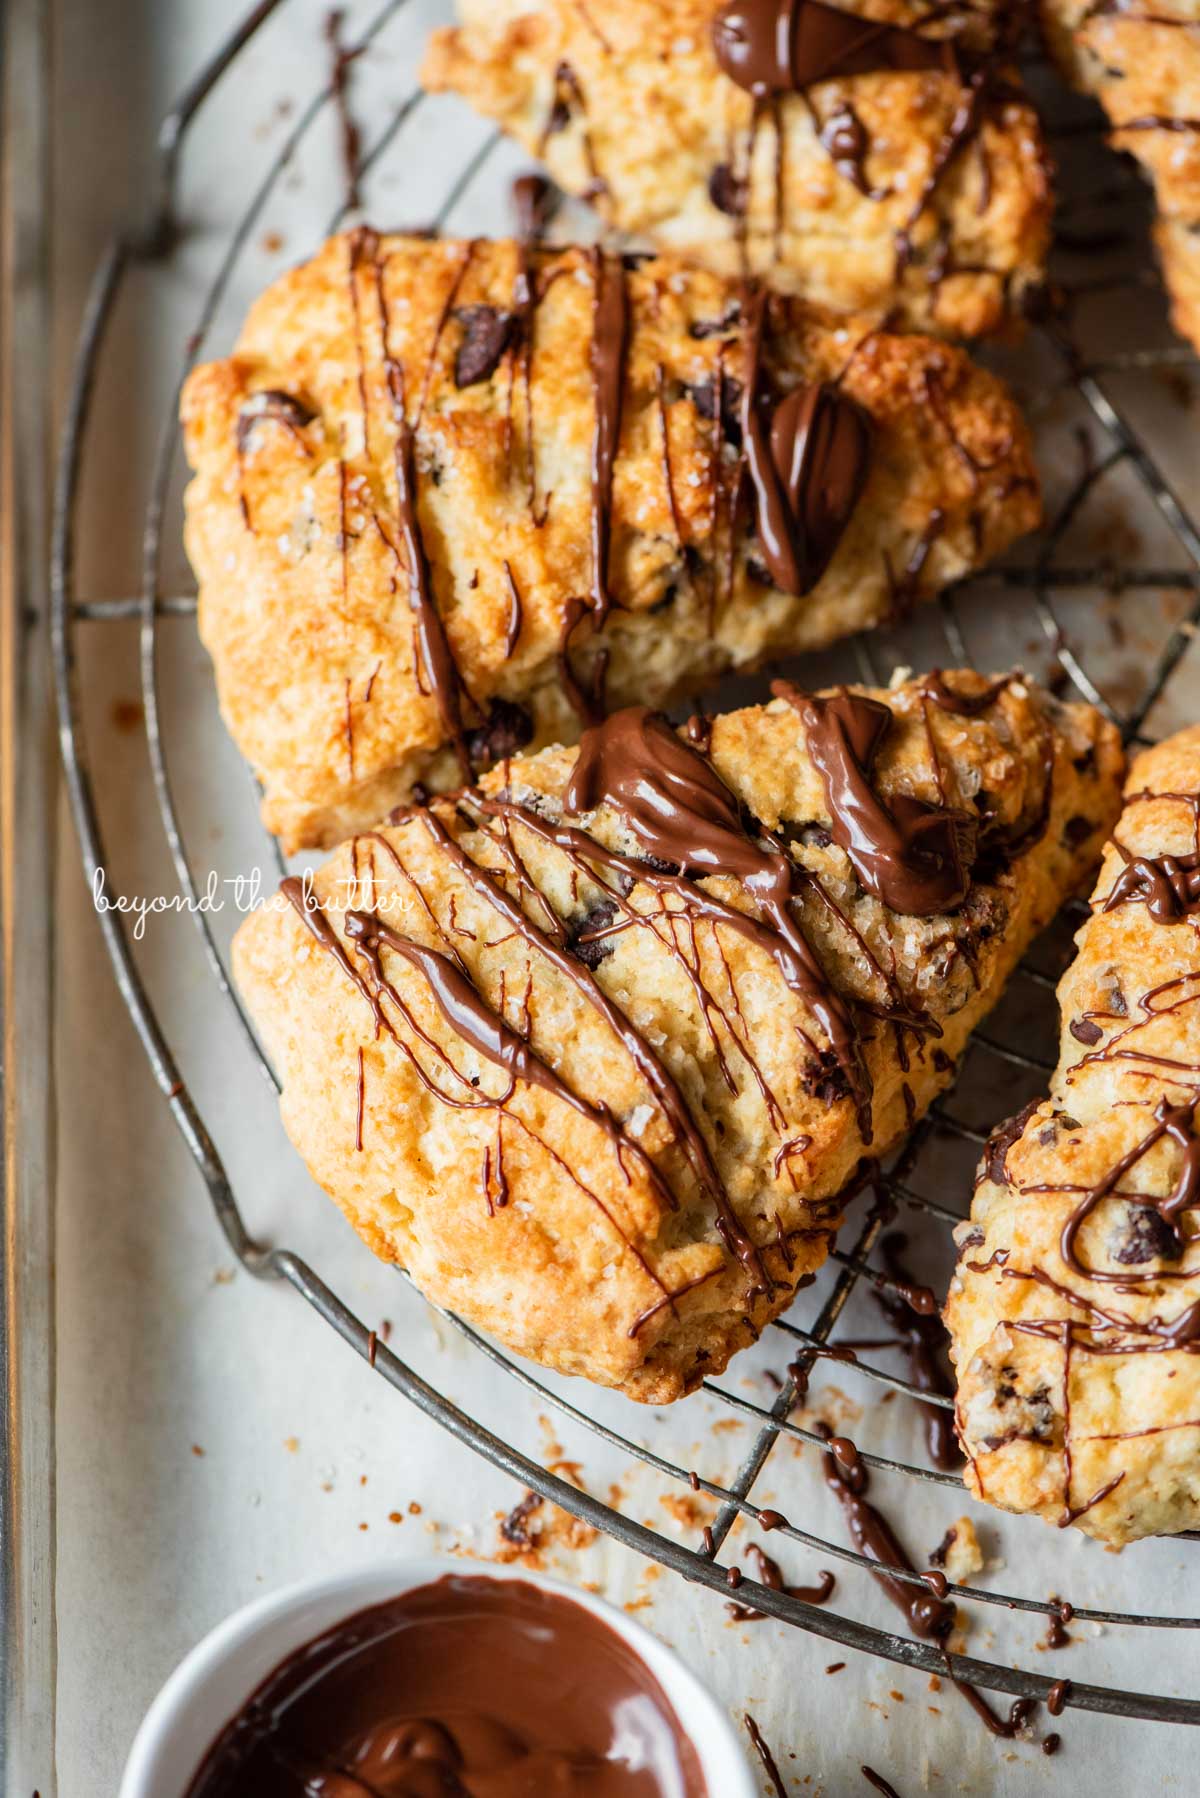 Chocolate chip scones drizzled with melted chocolate on a wire cooling rack | © Beyond the Butter®